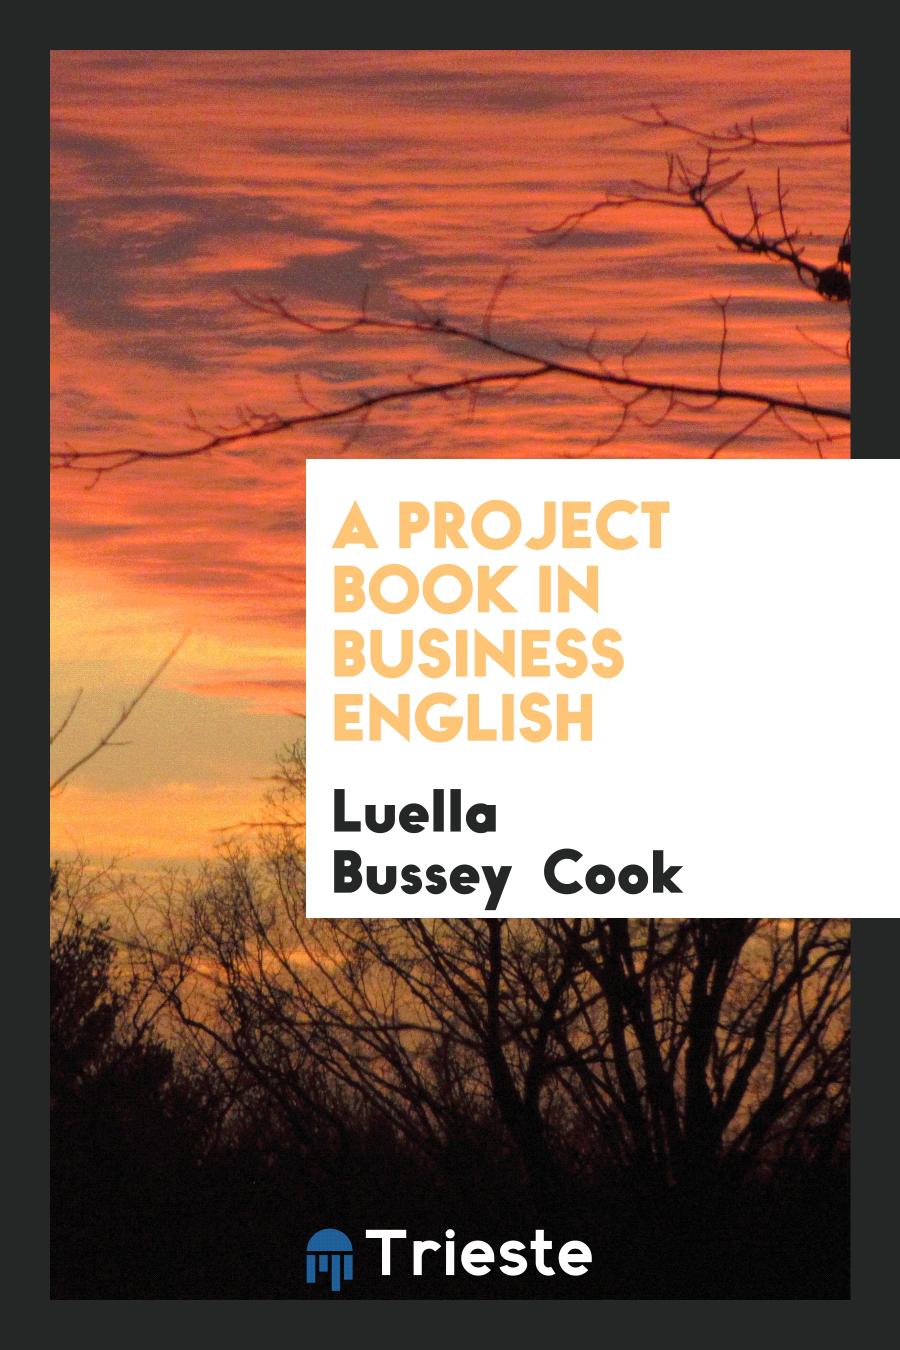 A Project Book in Business English